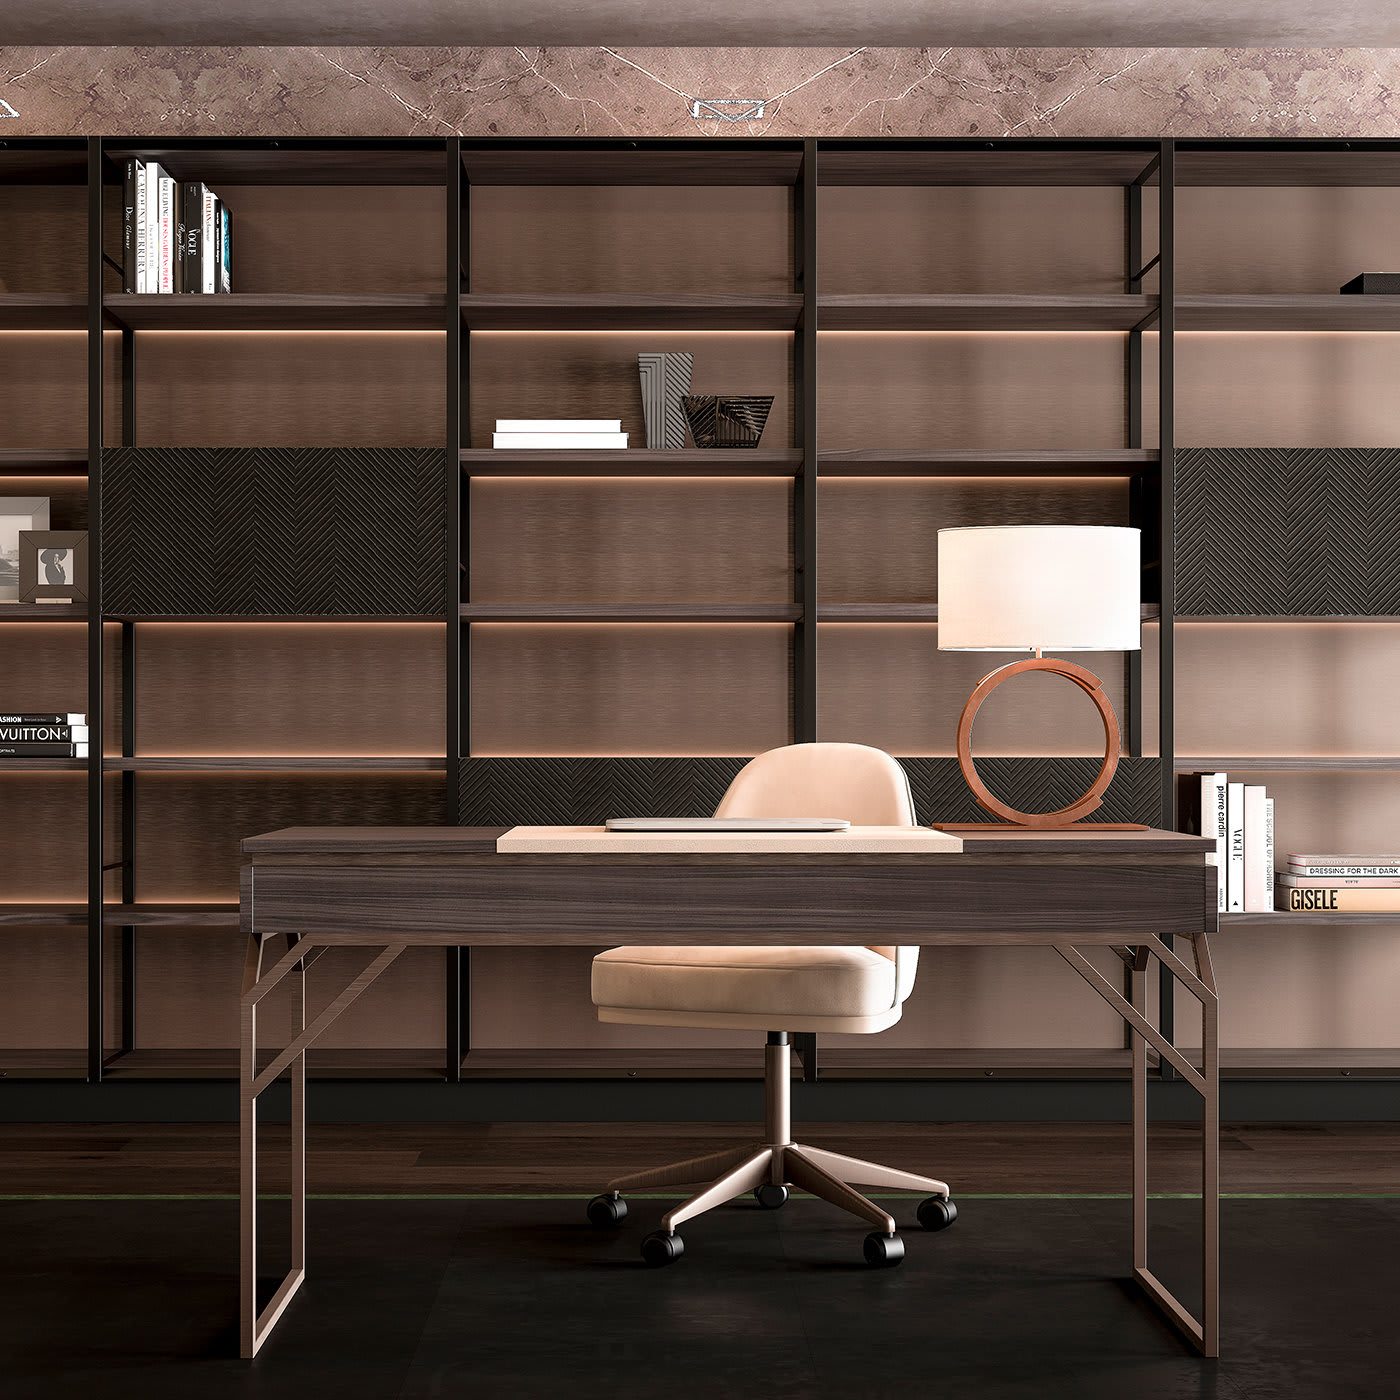 Desk in leather and wood - CPRN Homood